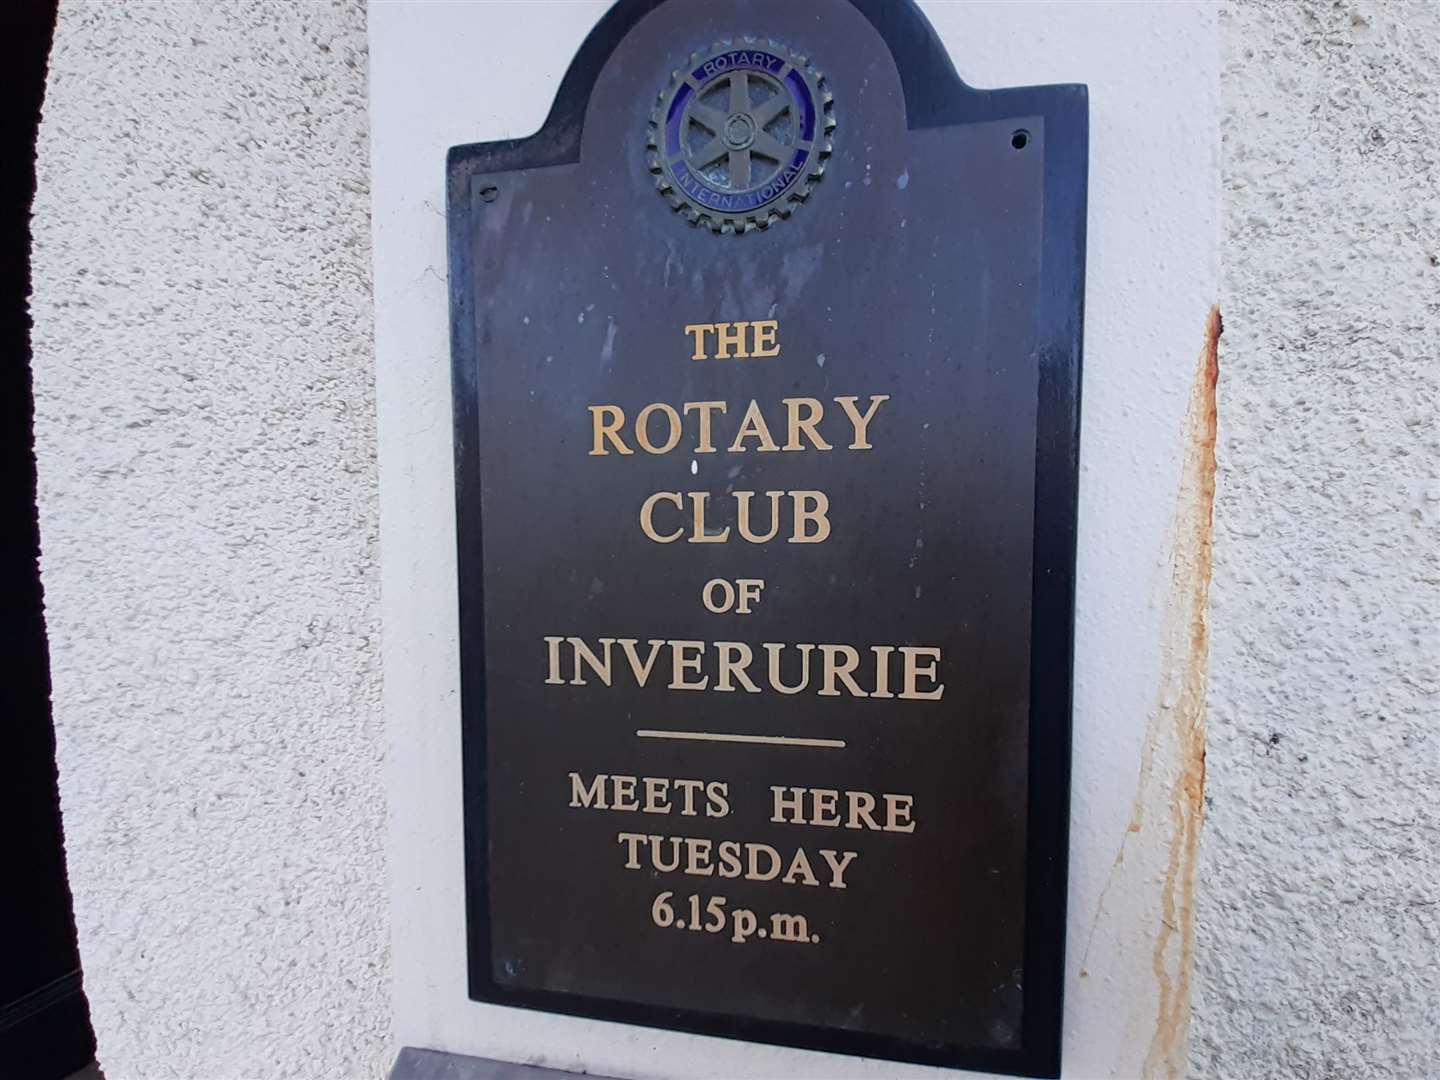 Inverurie Rotary met at the Kintore Arms.